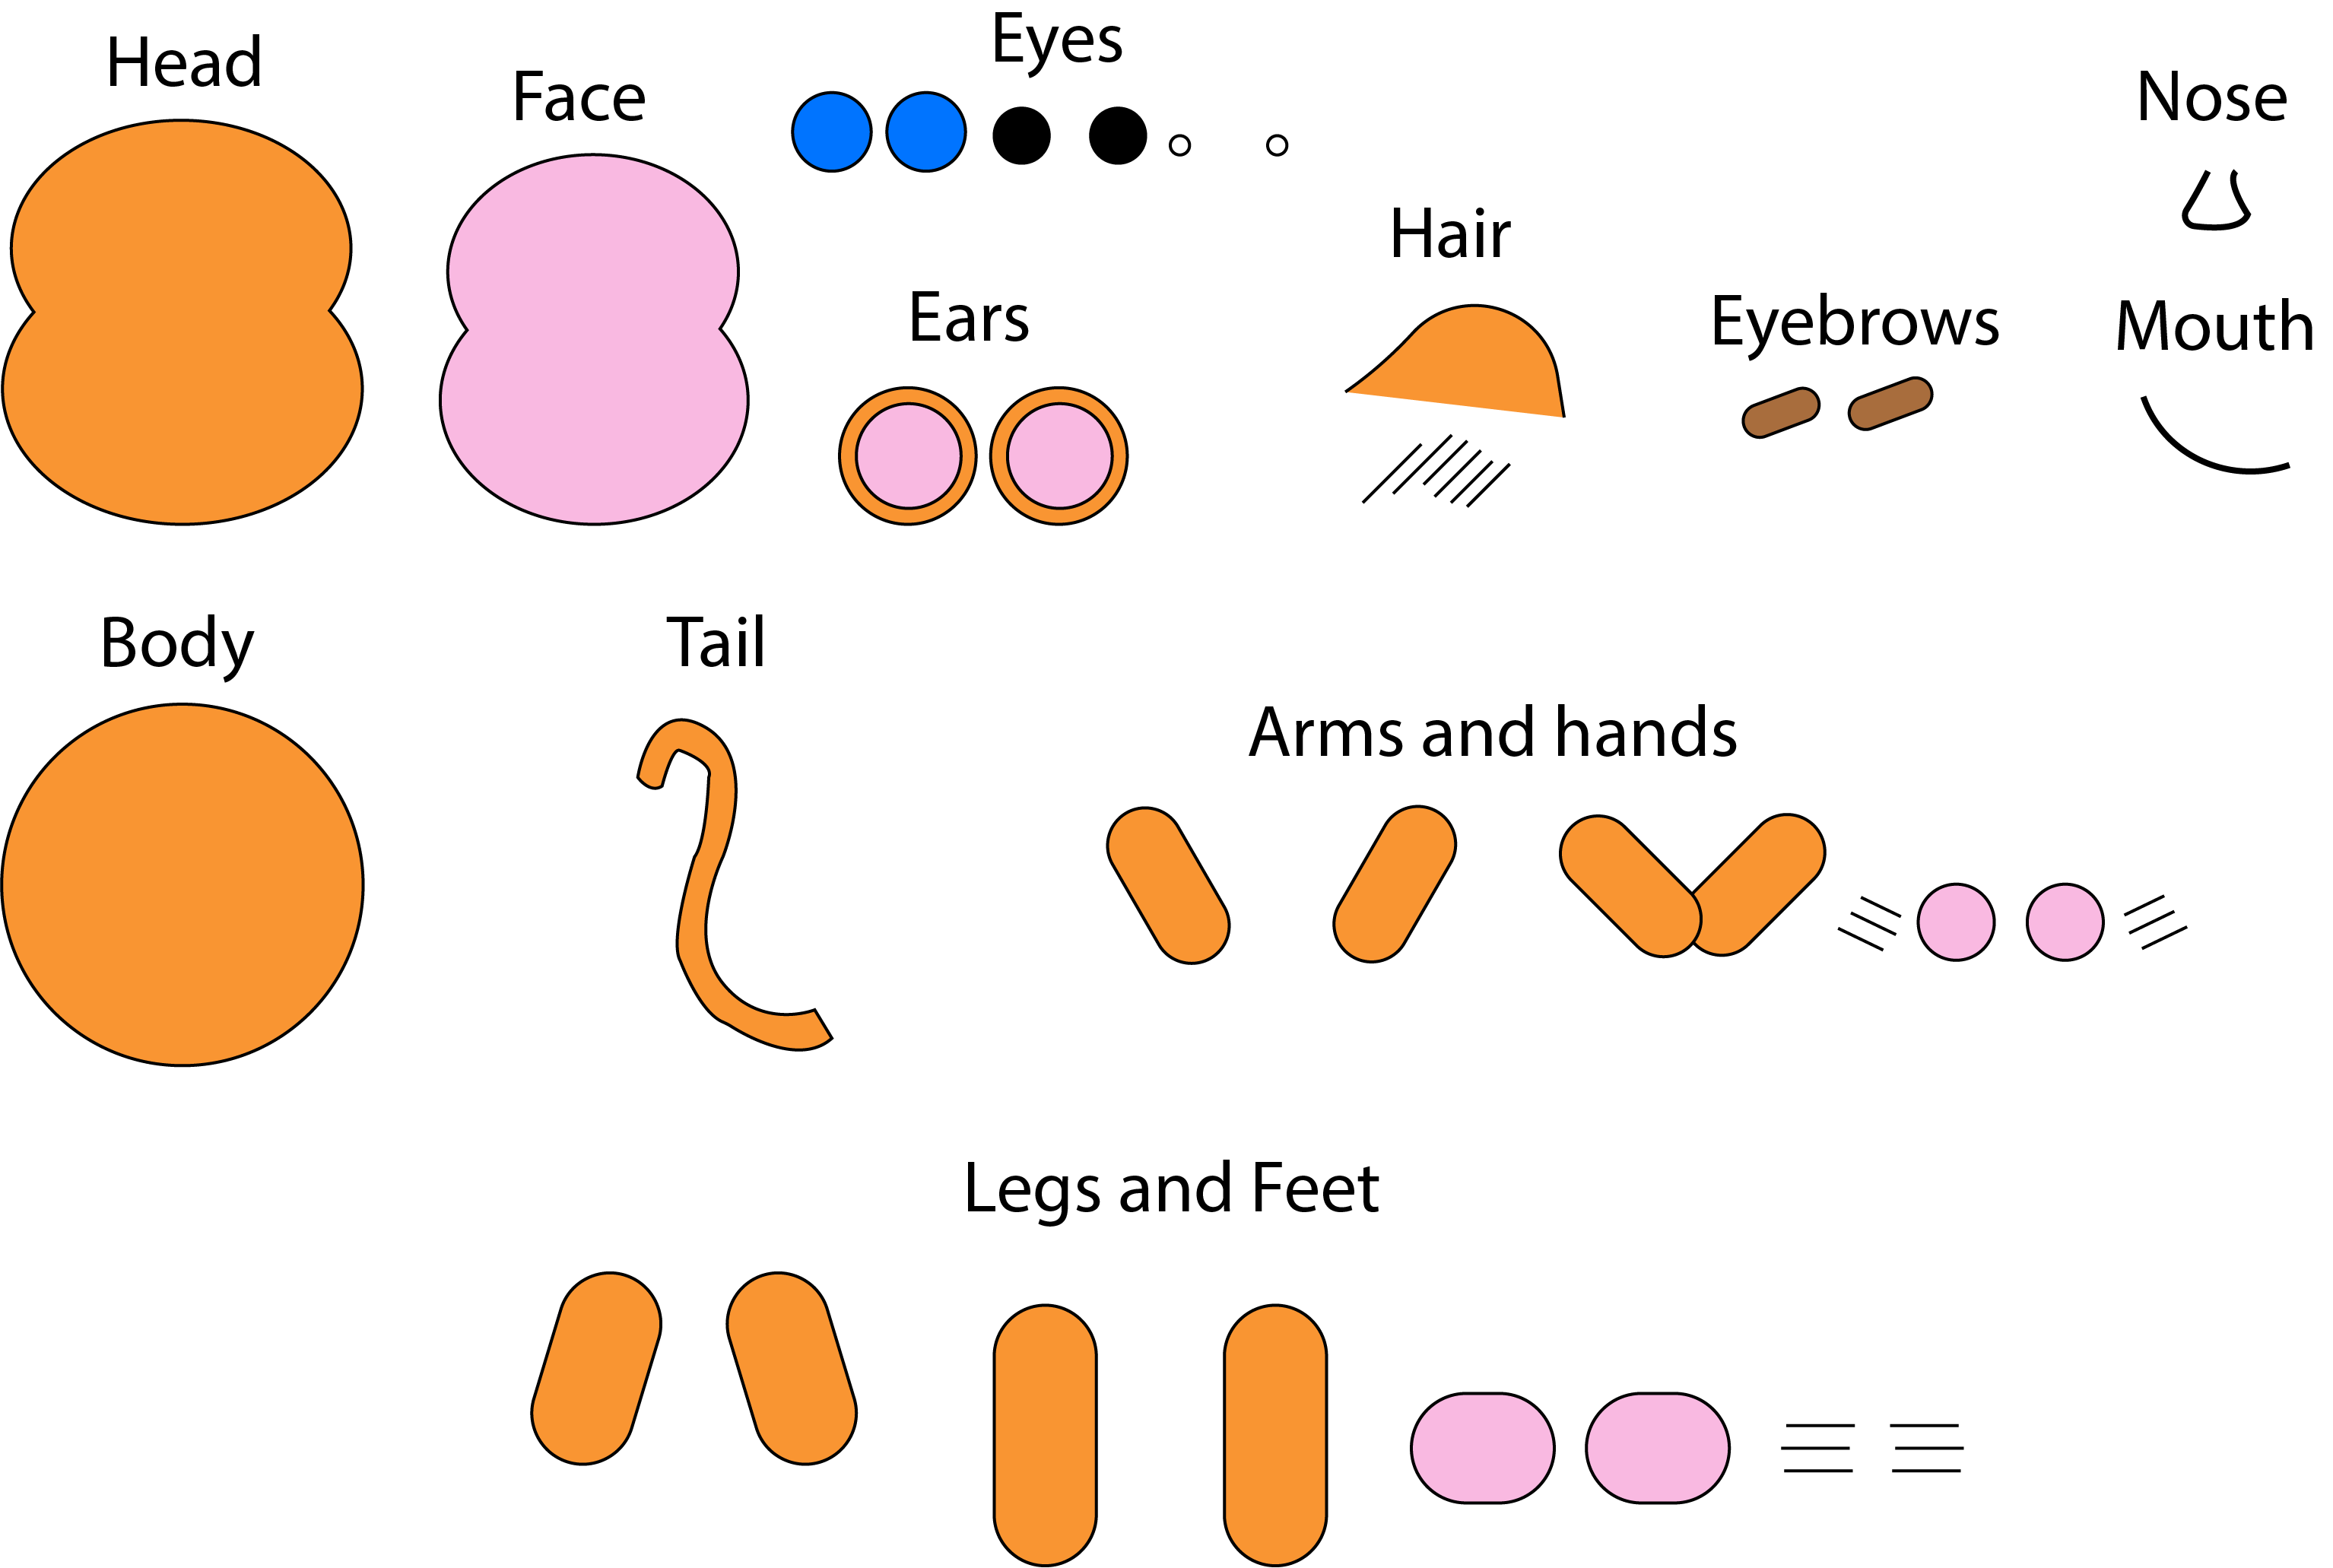 Body Parts of the Final Character